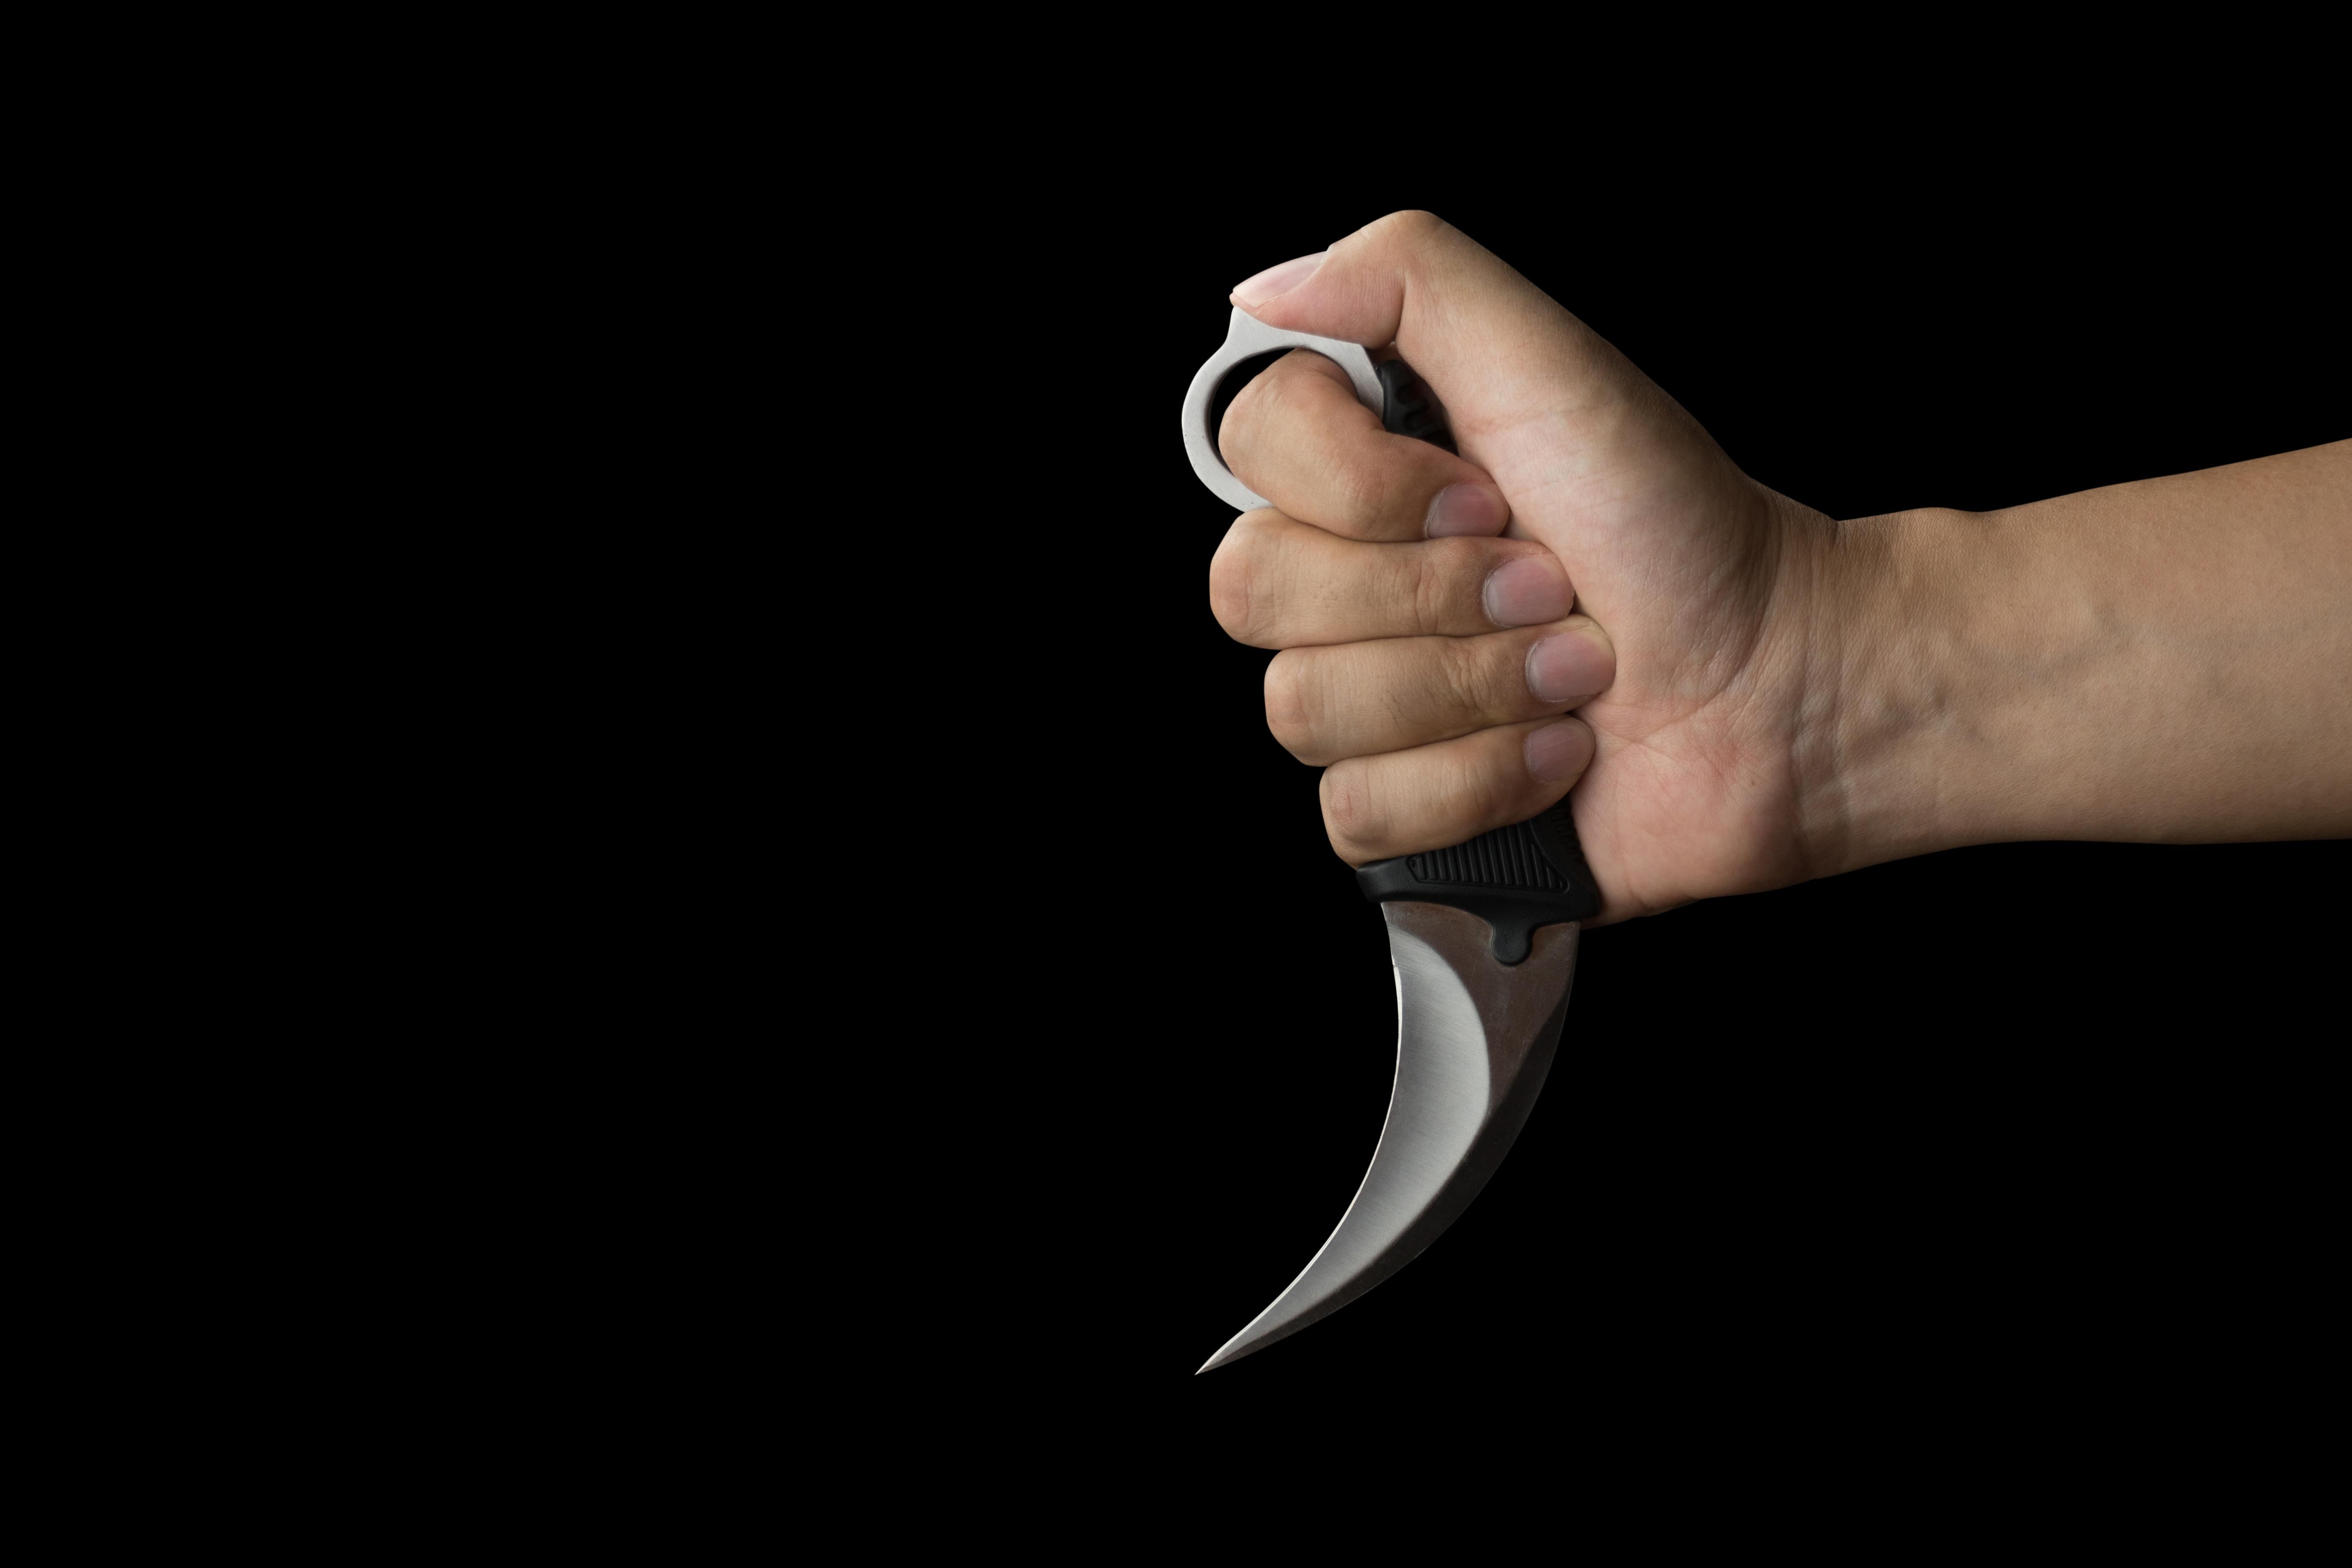 Four men arrested over alleged karambit knife attack that injured two others in Prinsep Street